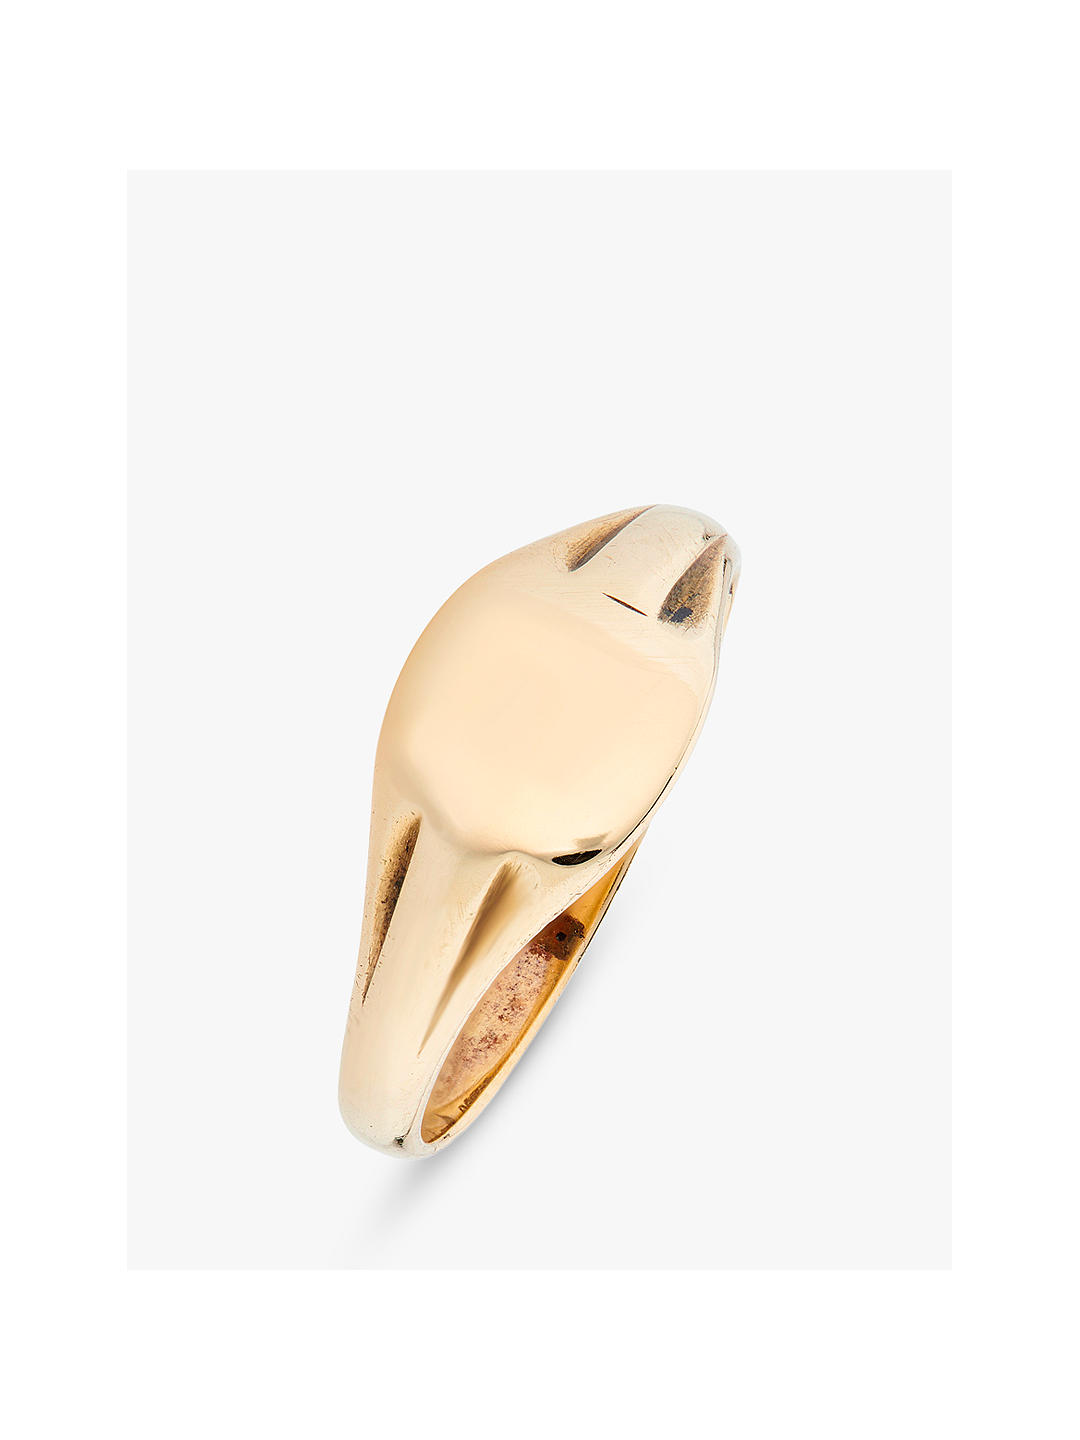 L & T Heirlooms 9ct Yellow Gold Second Hand Fluted Shoulders Signet Ring, Dated Circa 1920s, Gold